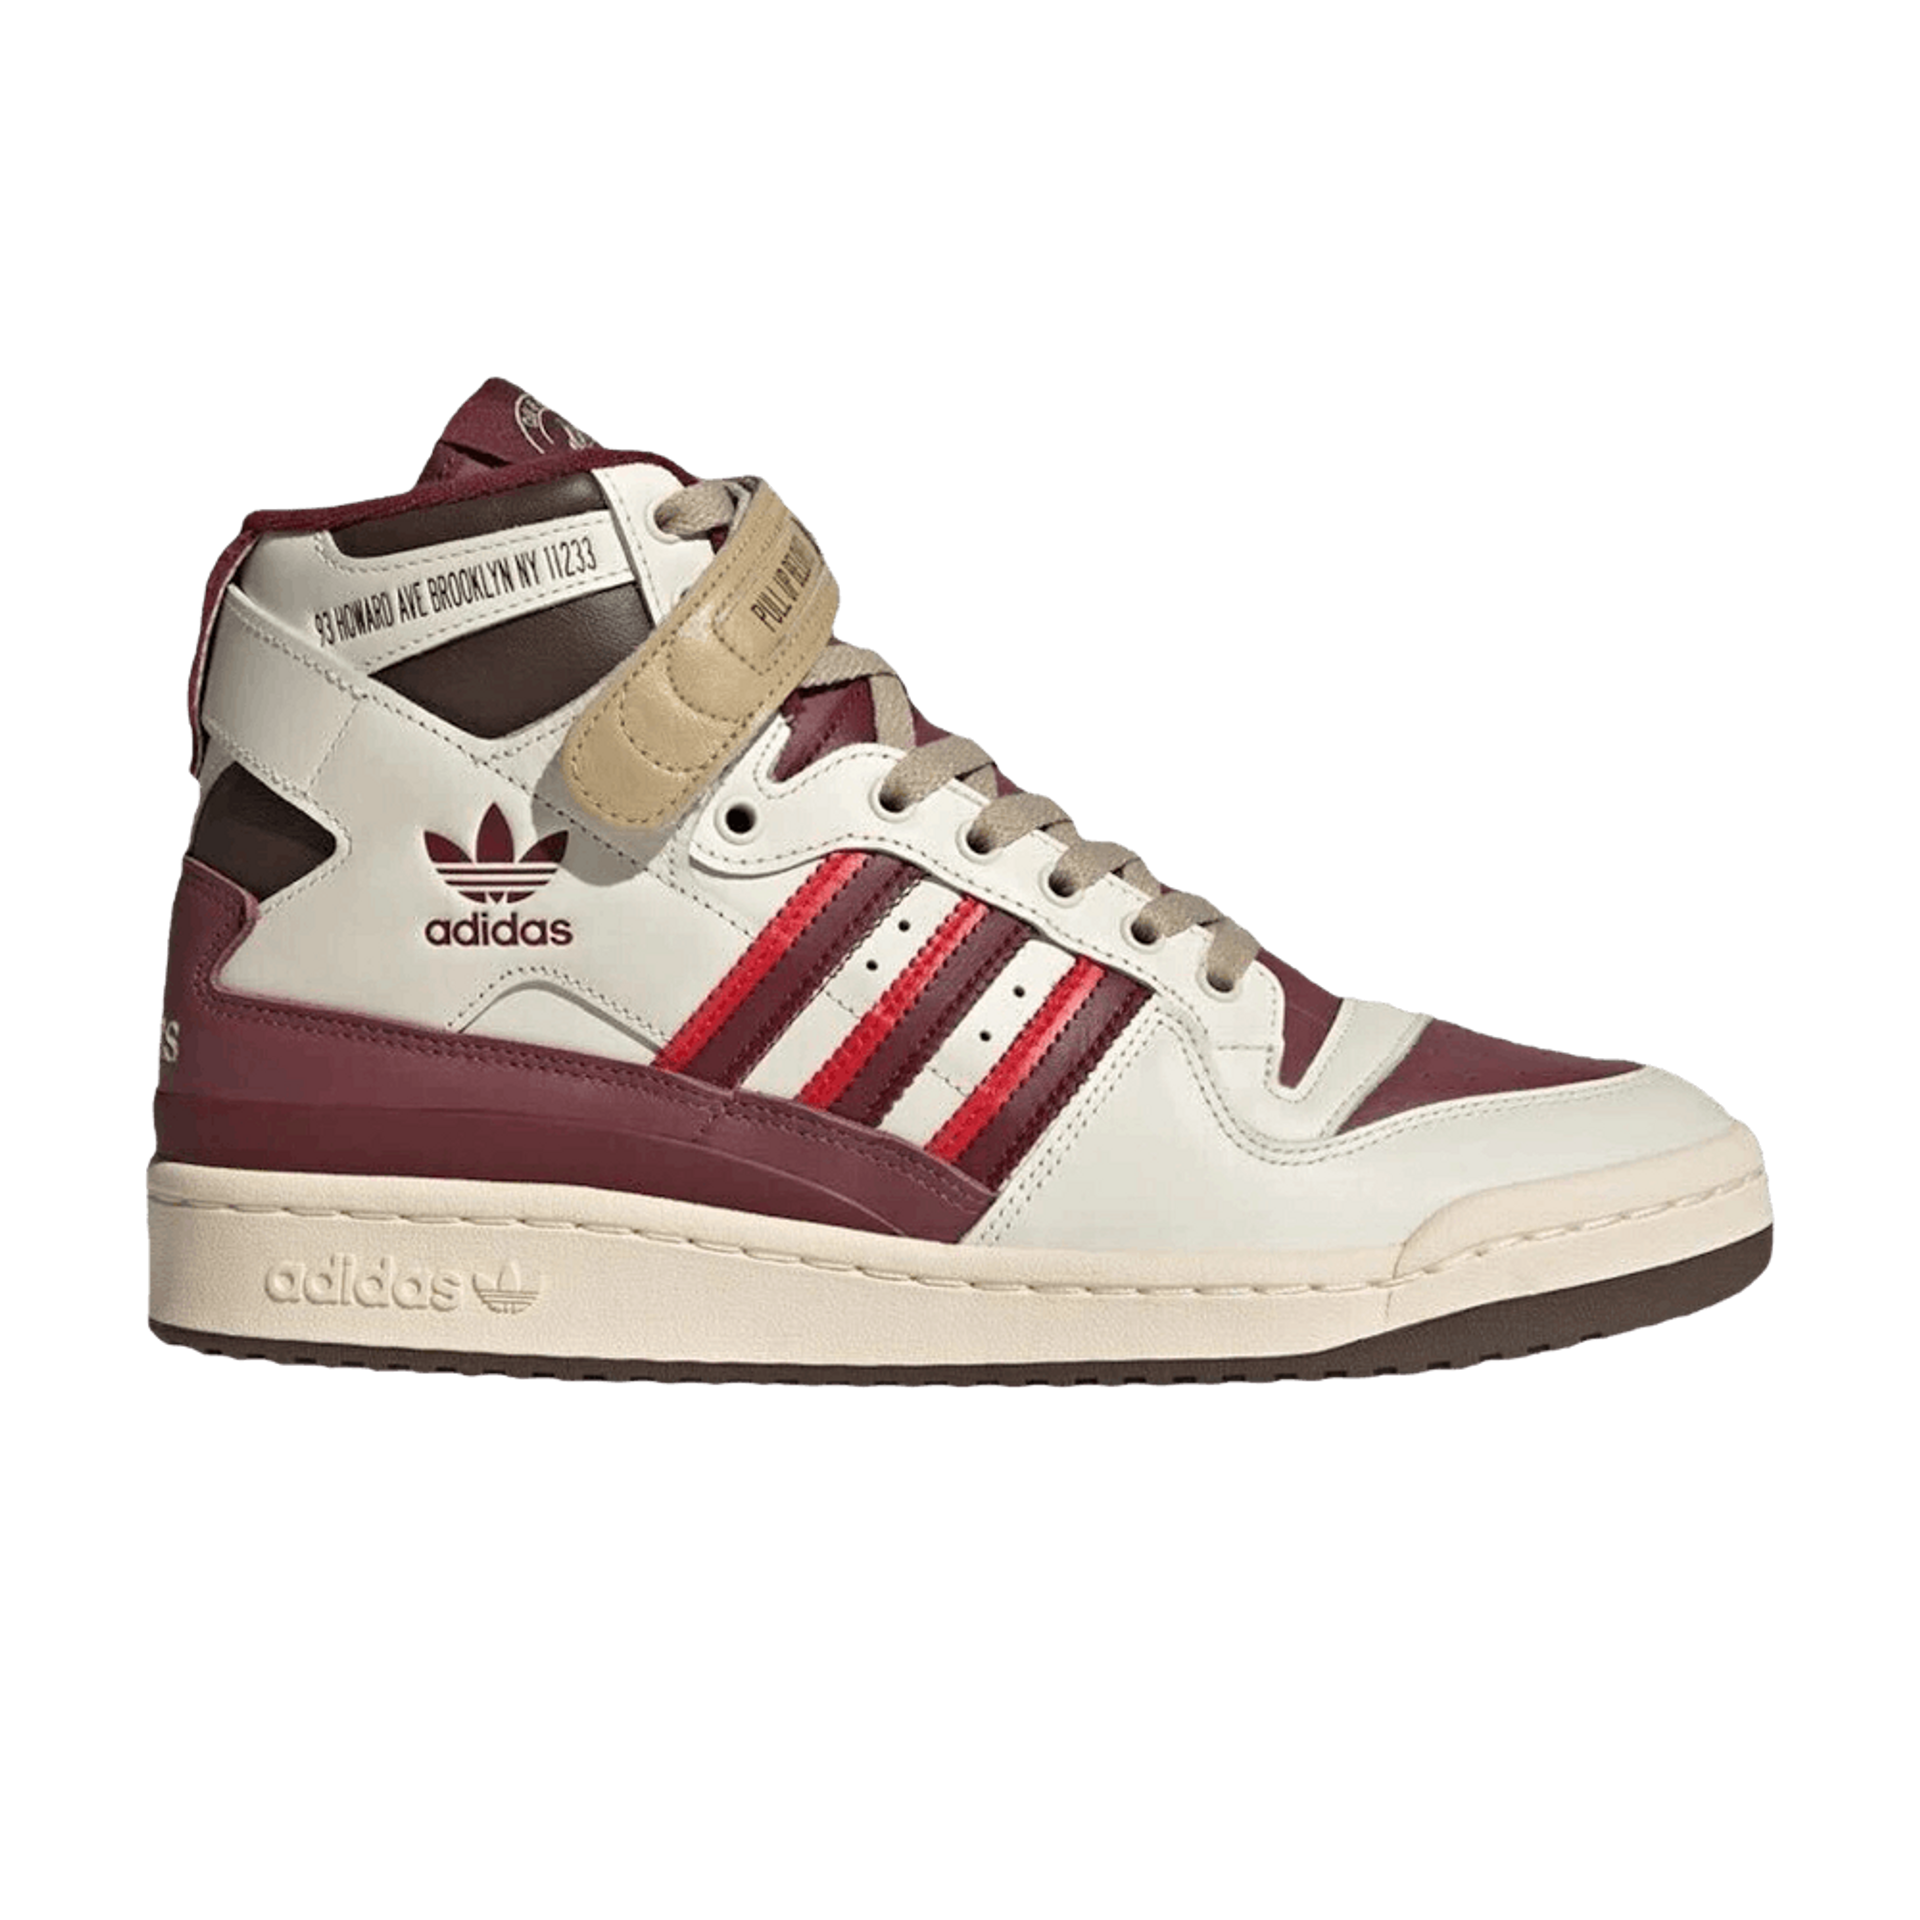 adidas Cuts & Slices x Forum 84 High 'Pull Up Beloved'